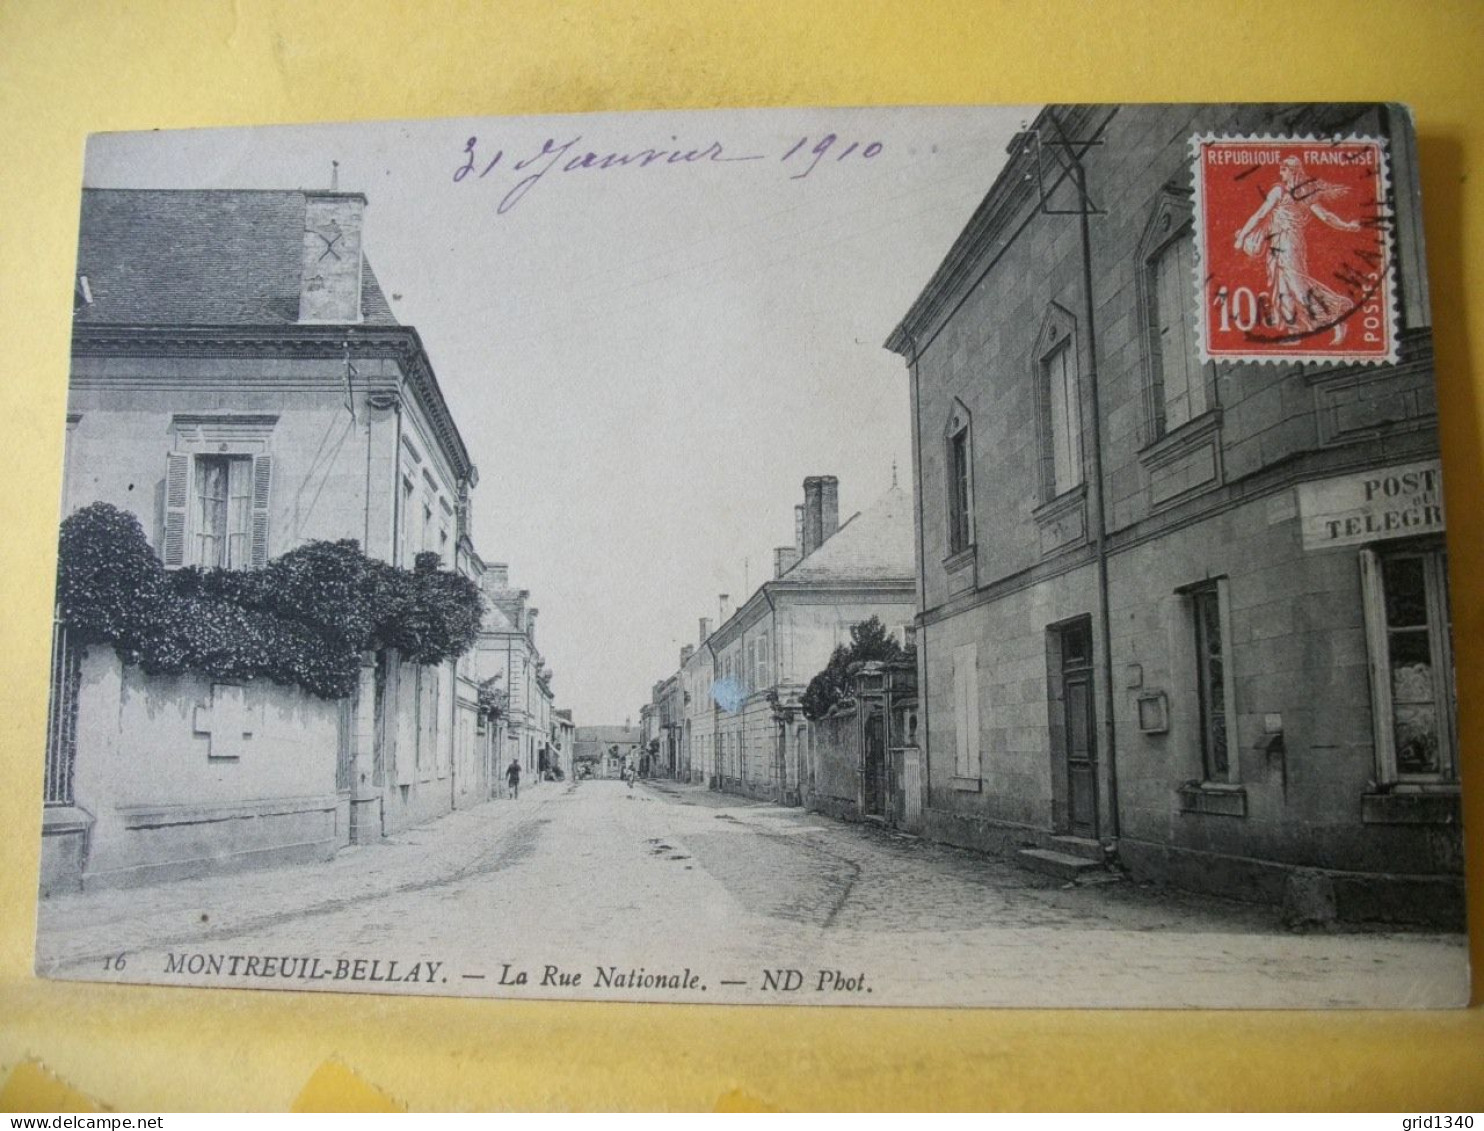 49 5810 CPA 1910 - 49 MONTREUIL BELLAY - LA RUE NATIONALE - ANIMATION - Montreuil Bellay